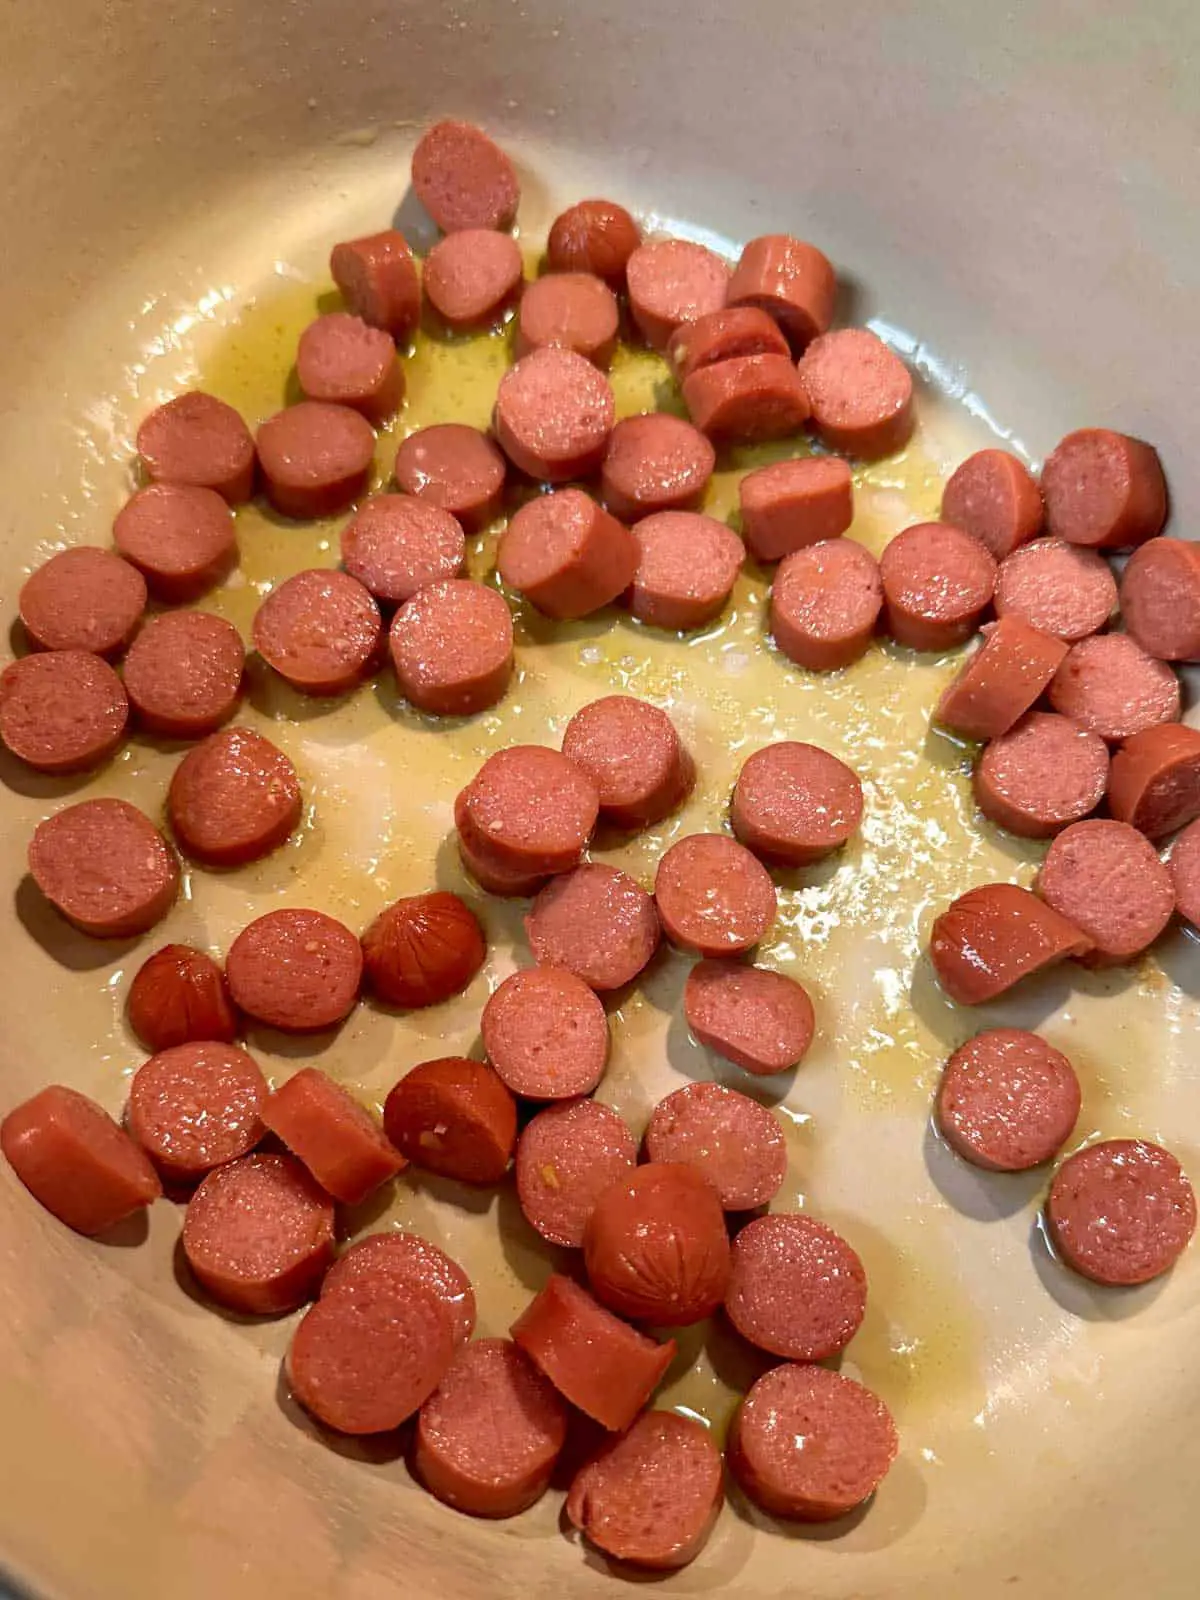 Slices of hot dogs cooking in oil in a Dutch oven.